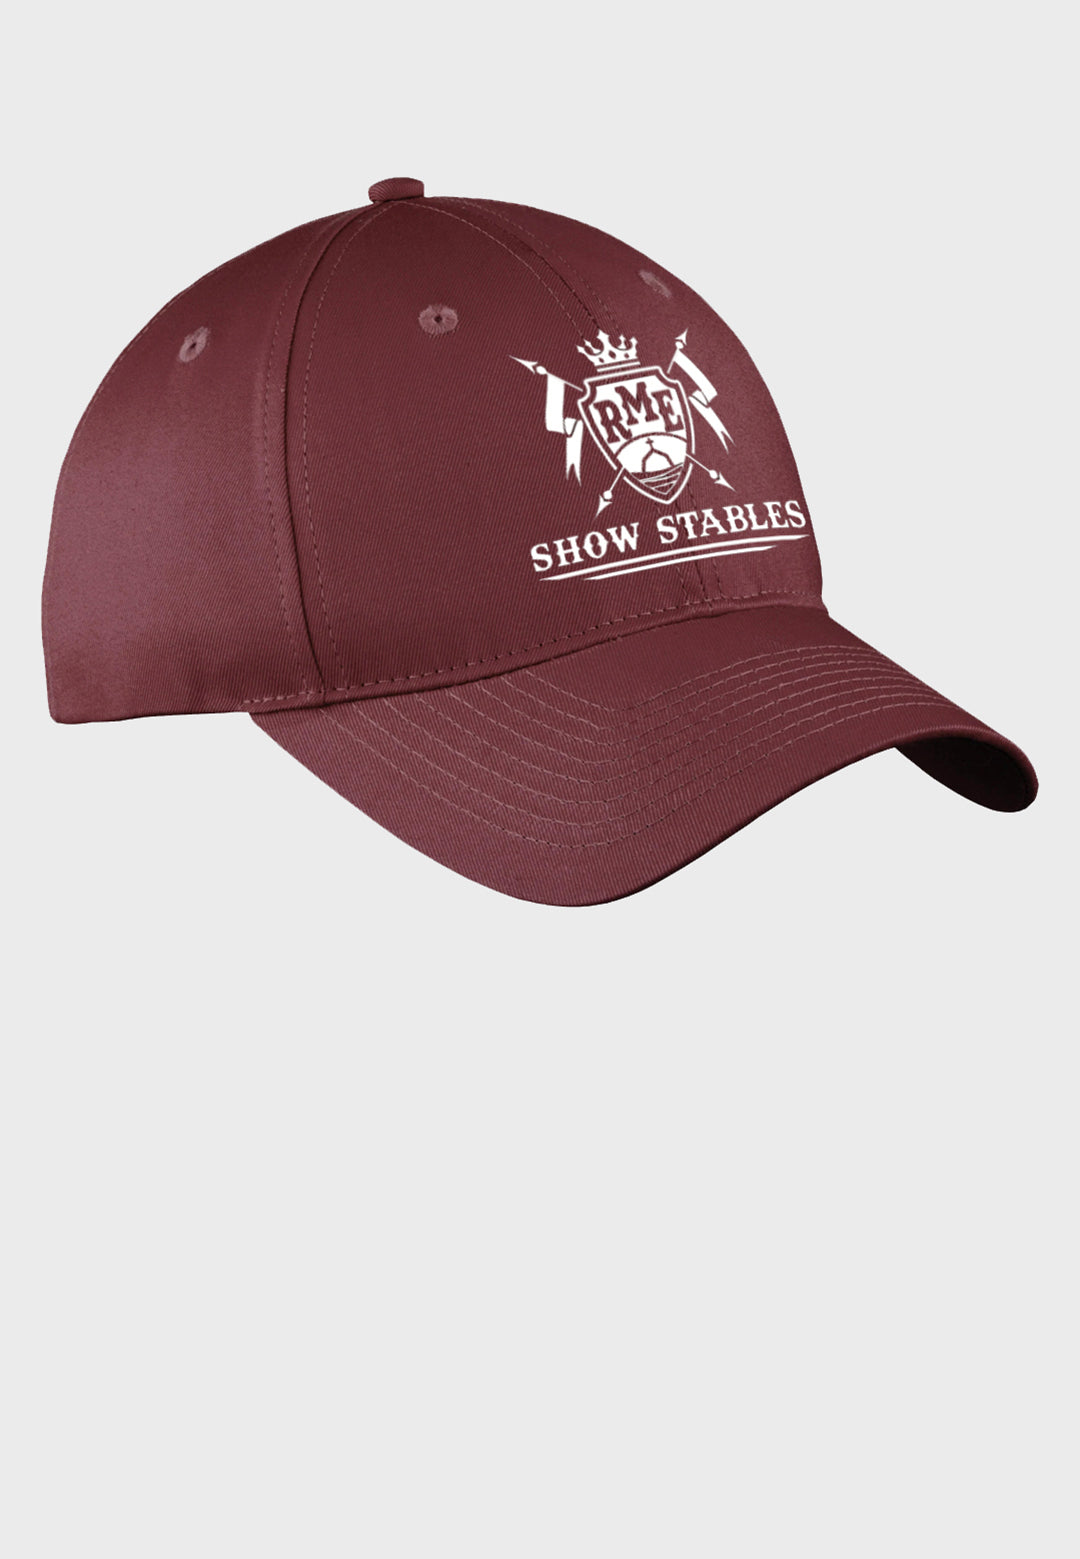 RME Show Stables Port & Company® Six-Panel Unstructured Twill Cap - Maroon